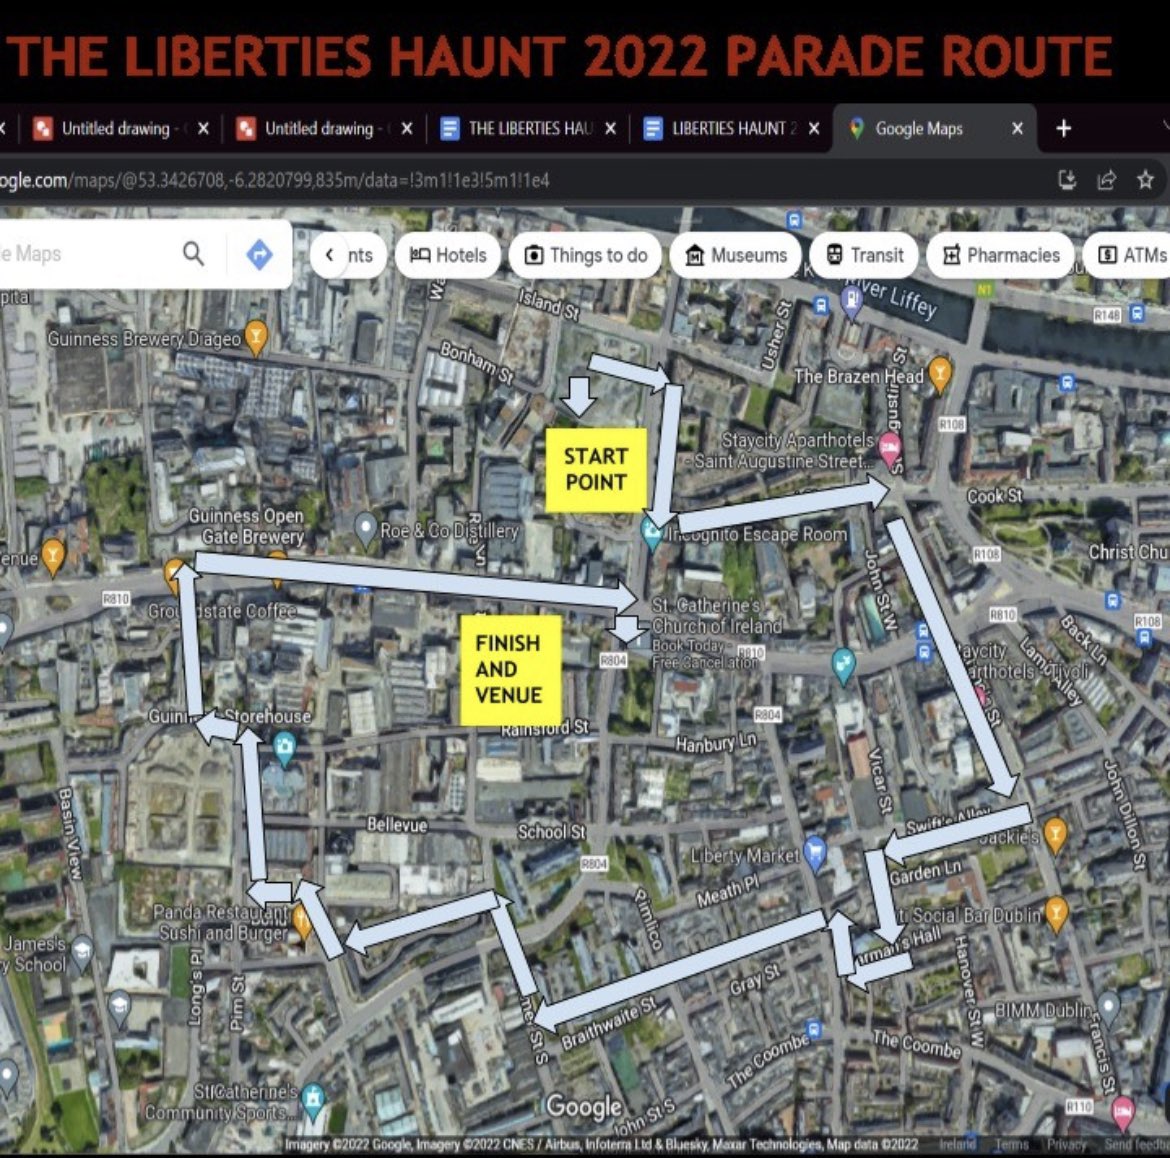 All set for The Liberties Haunt. The parade kicks off at Bridgefoot Street Park at 4:30pm, follow the route through the area and on to the Spooktacular Haunt at Thomas Court. All welcome. Stay Safe and have fun this Halloween 🎃 👻 #nobonfires